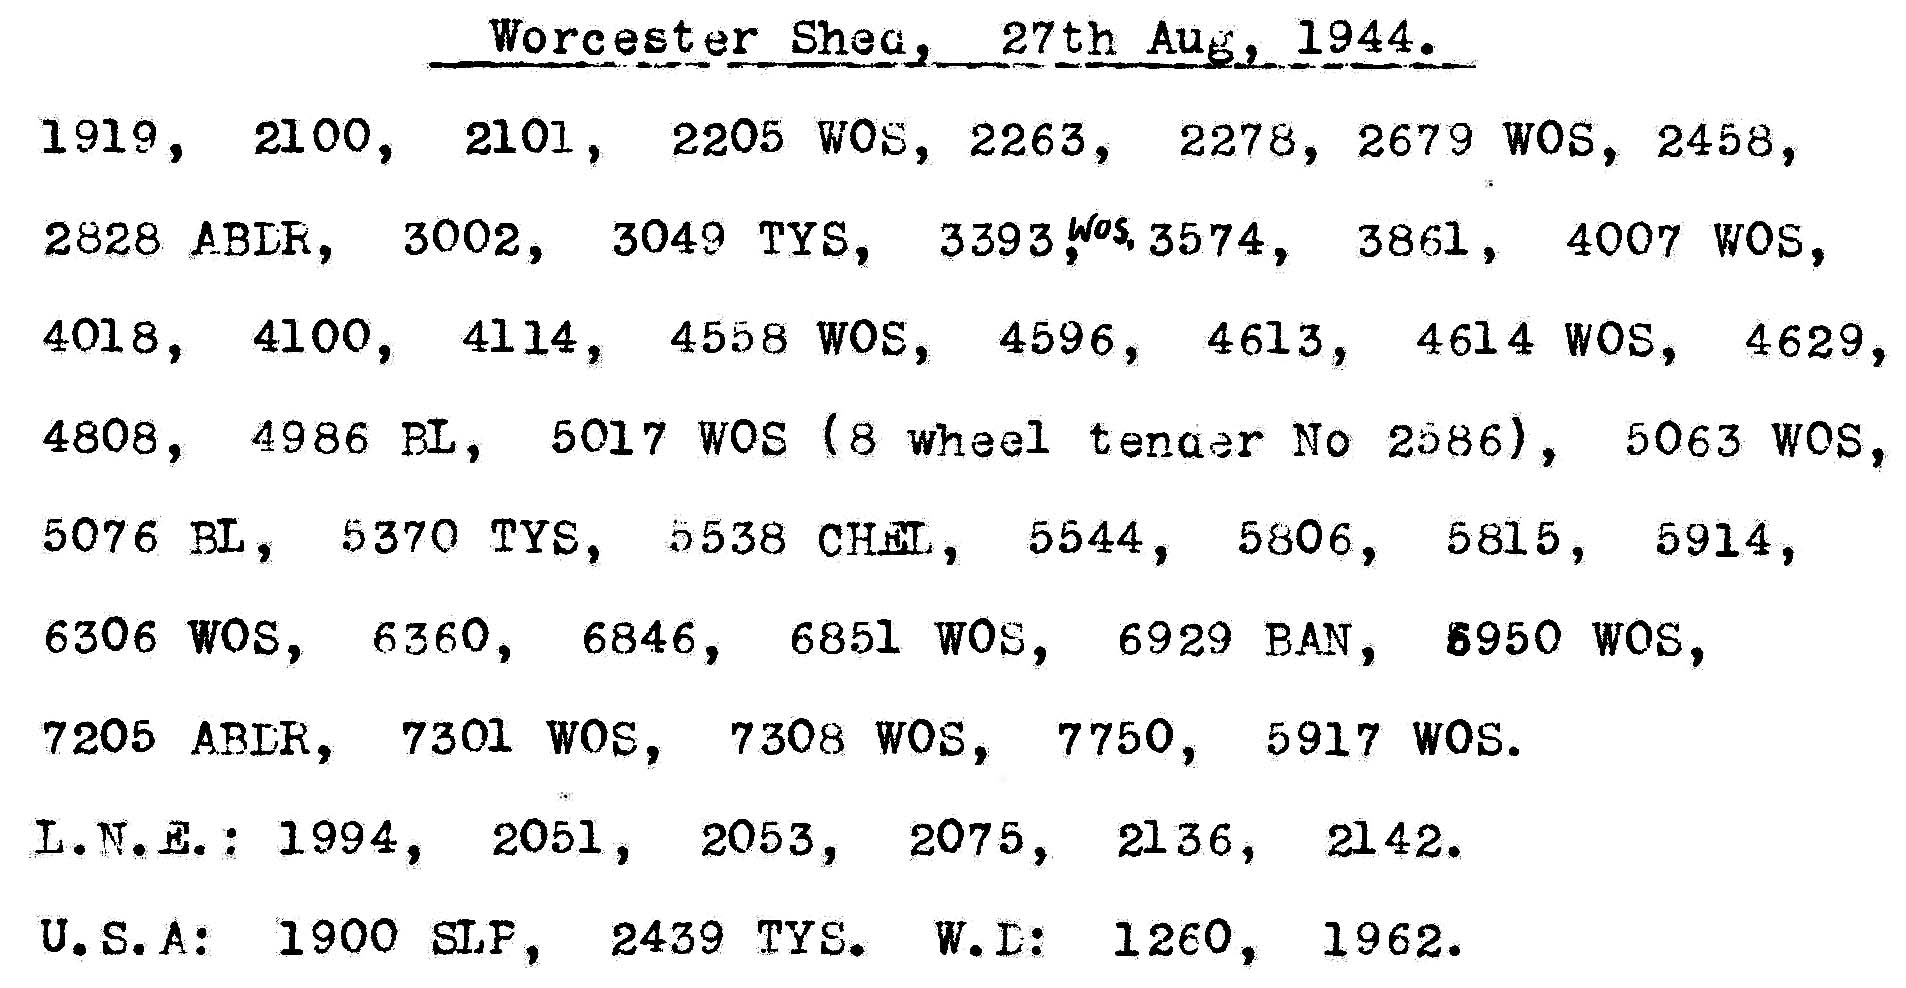 27th August 1944 - Worcester Shed.